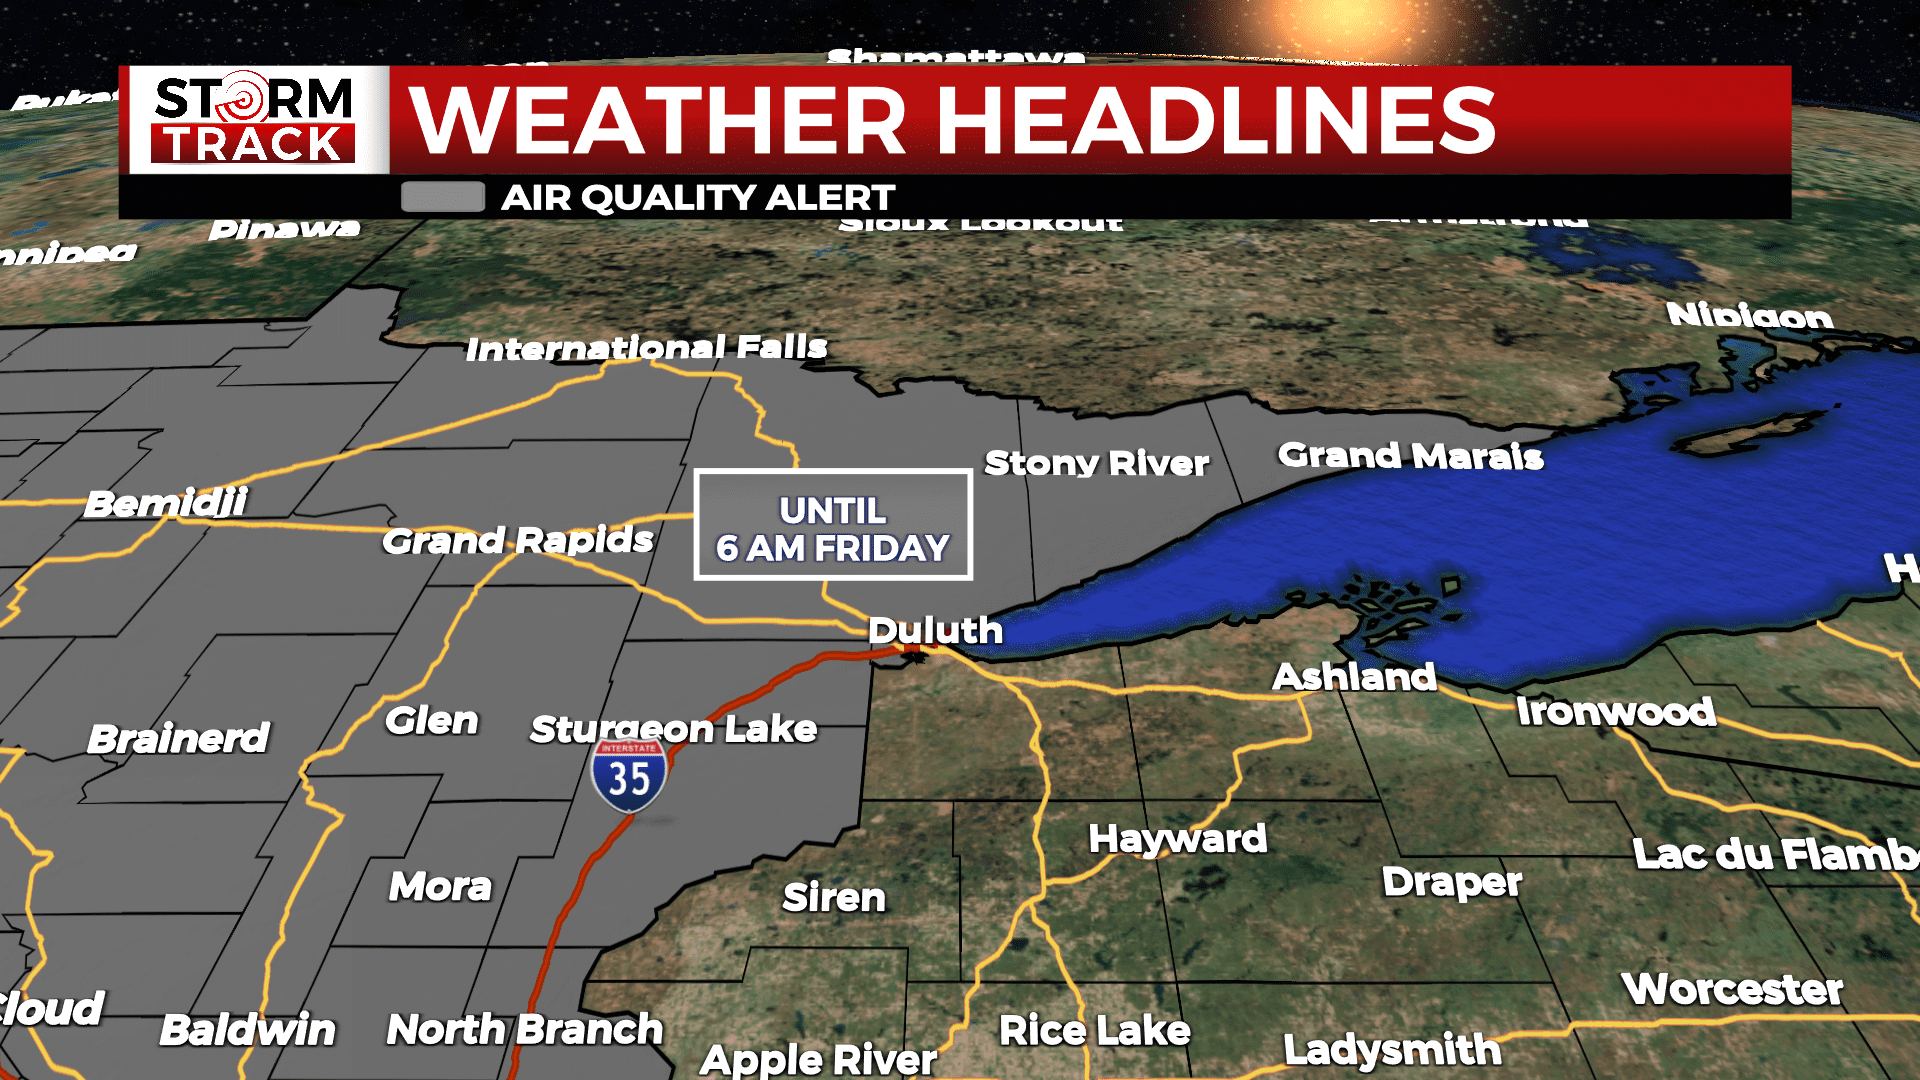 An Air Quality Alert is in effect in Minnesota until 6 am Friday